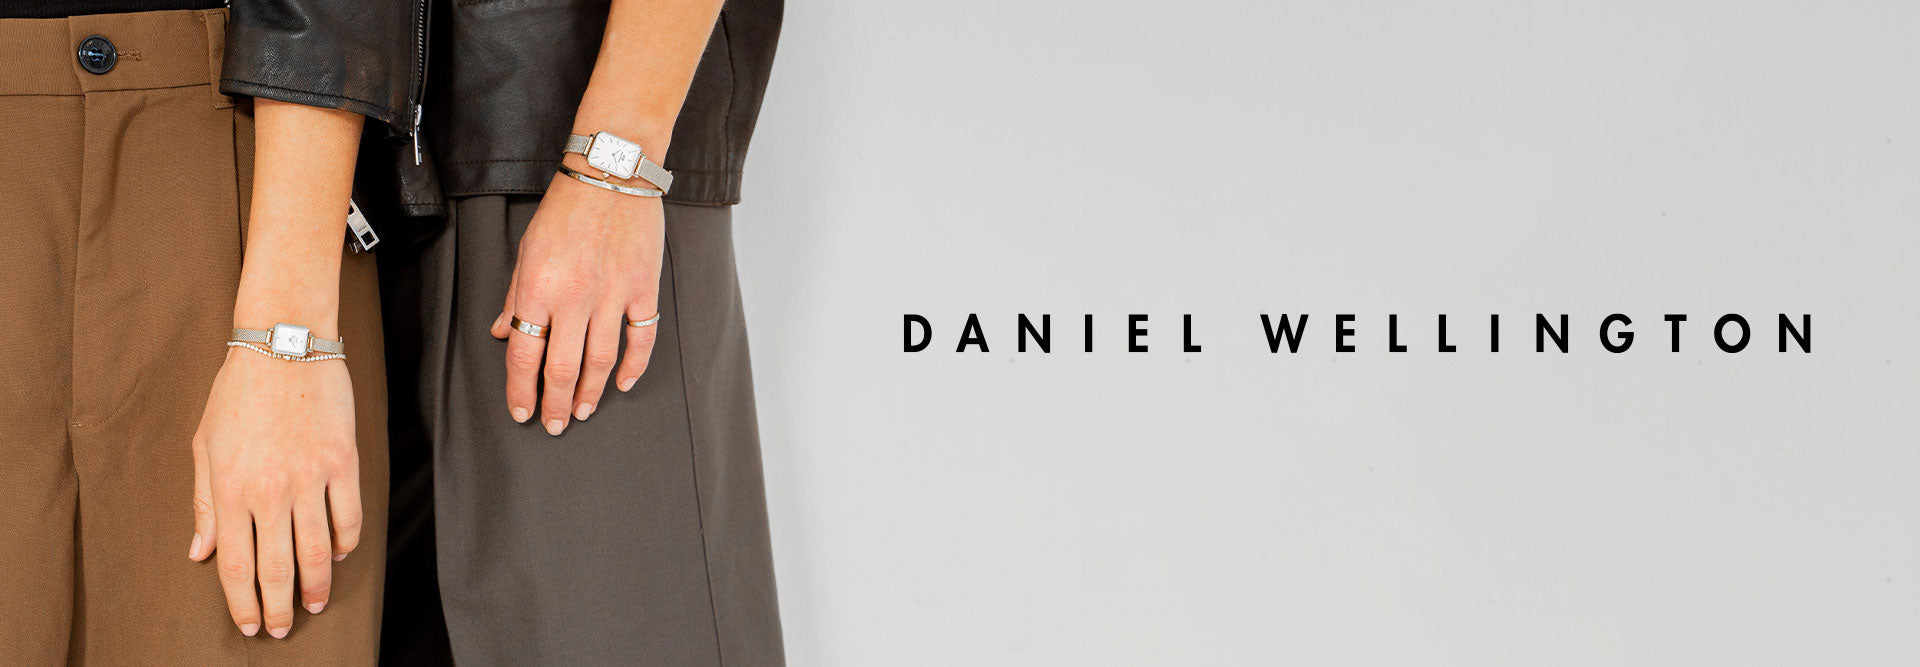 Daniel Wellington Watches At Just Watches